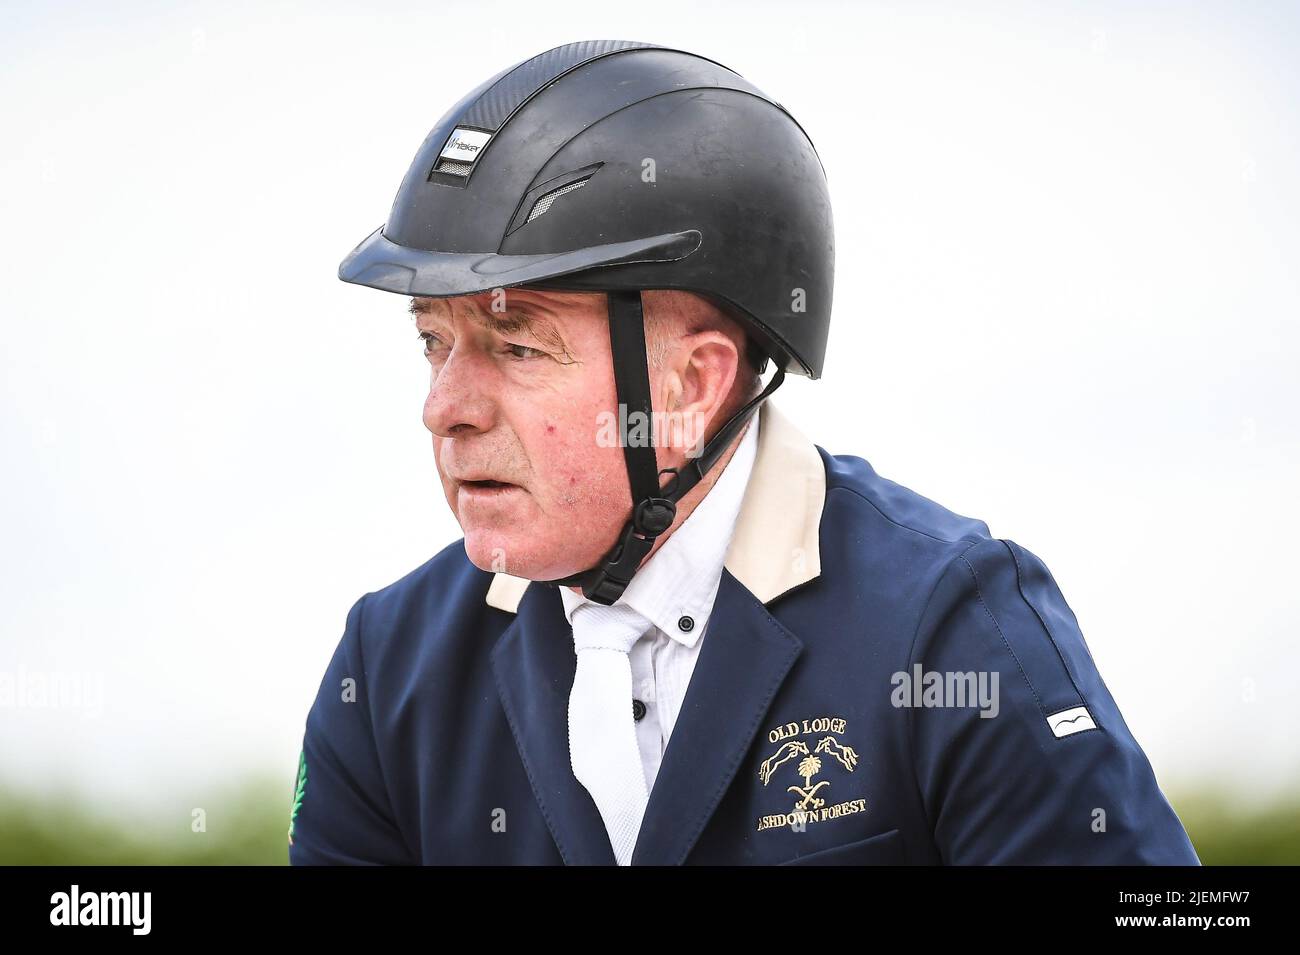 John whitaker hi-res stock photography and images - Alamy